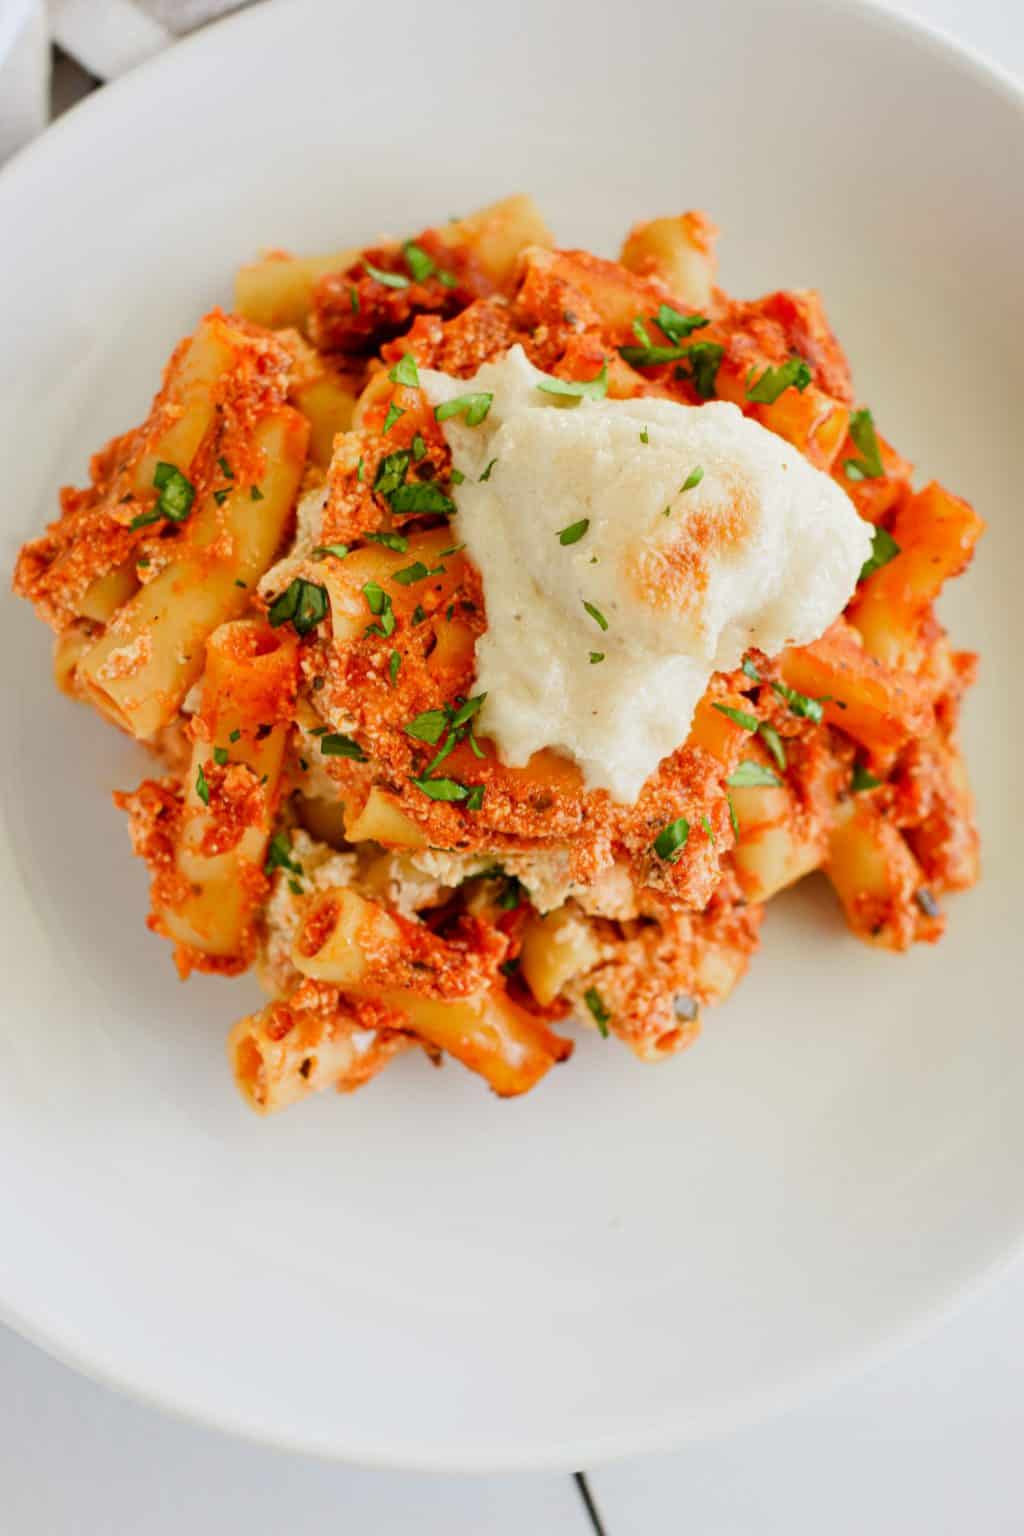 A serving of baked ziti on a plate.